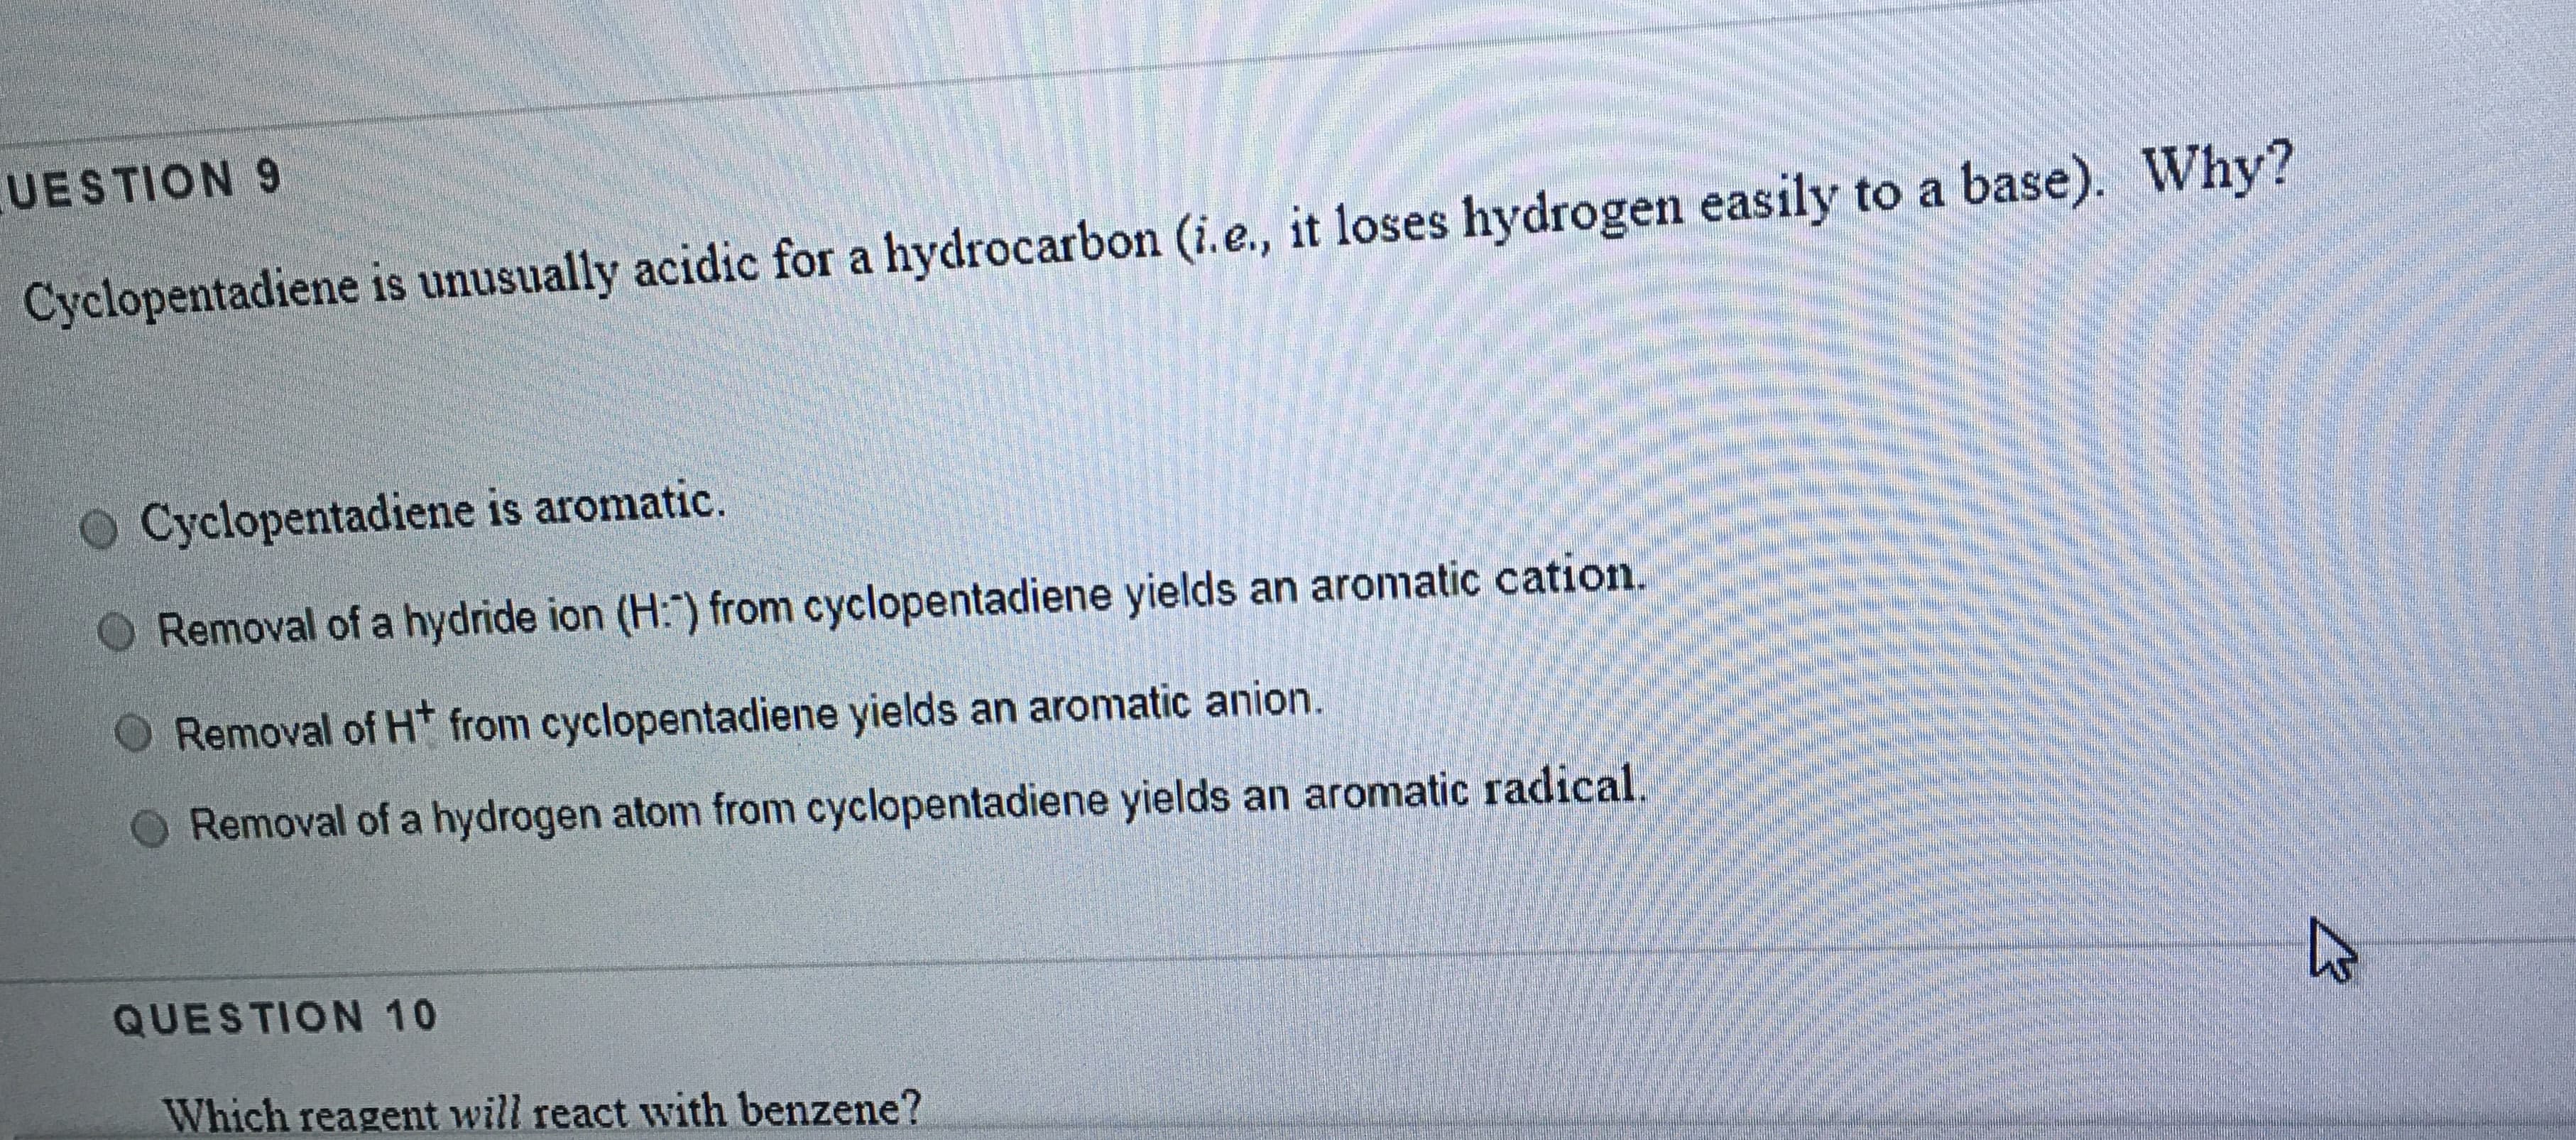 UESTION 9
Cyclopentadiene is unusually acidic for a hydrocarbon (i.e., it loses hydrogen easily to a base). Why?
O Cyclopentadiene is aromatic.
Removal of a hydride ion (H:") from cyclopentadiene yields an aromatic cation.
Removal of H* from cyclopentadiene yields an aromatic anion.
Removal of a hydrogen atom from cyclopentadiene yields an aromatic radical.
QUESTION 10
Which reagent will react with benzene?
